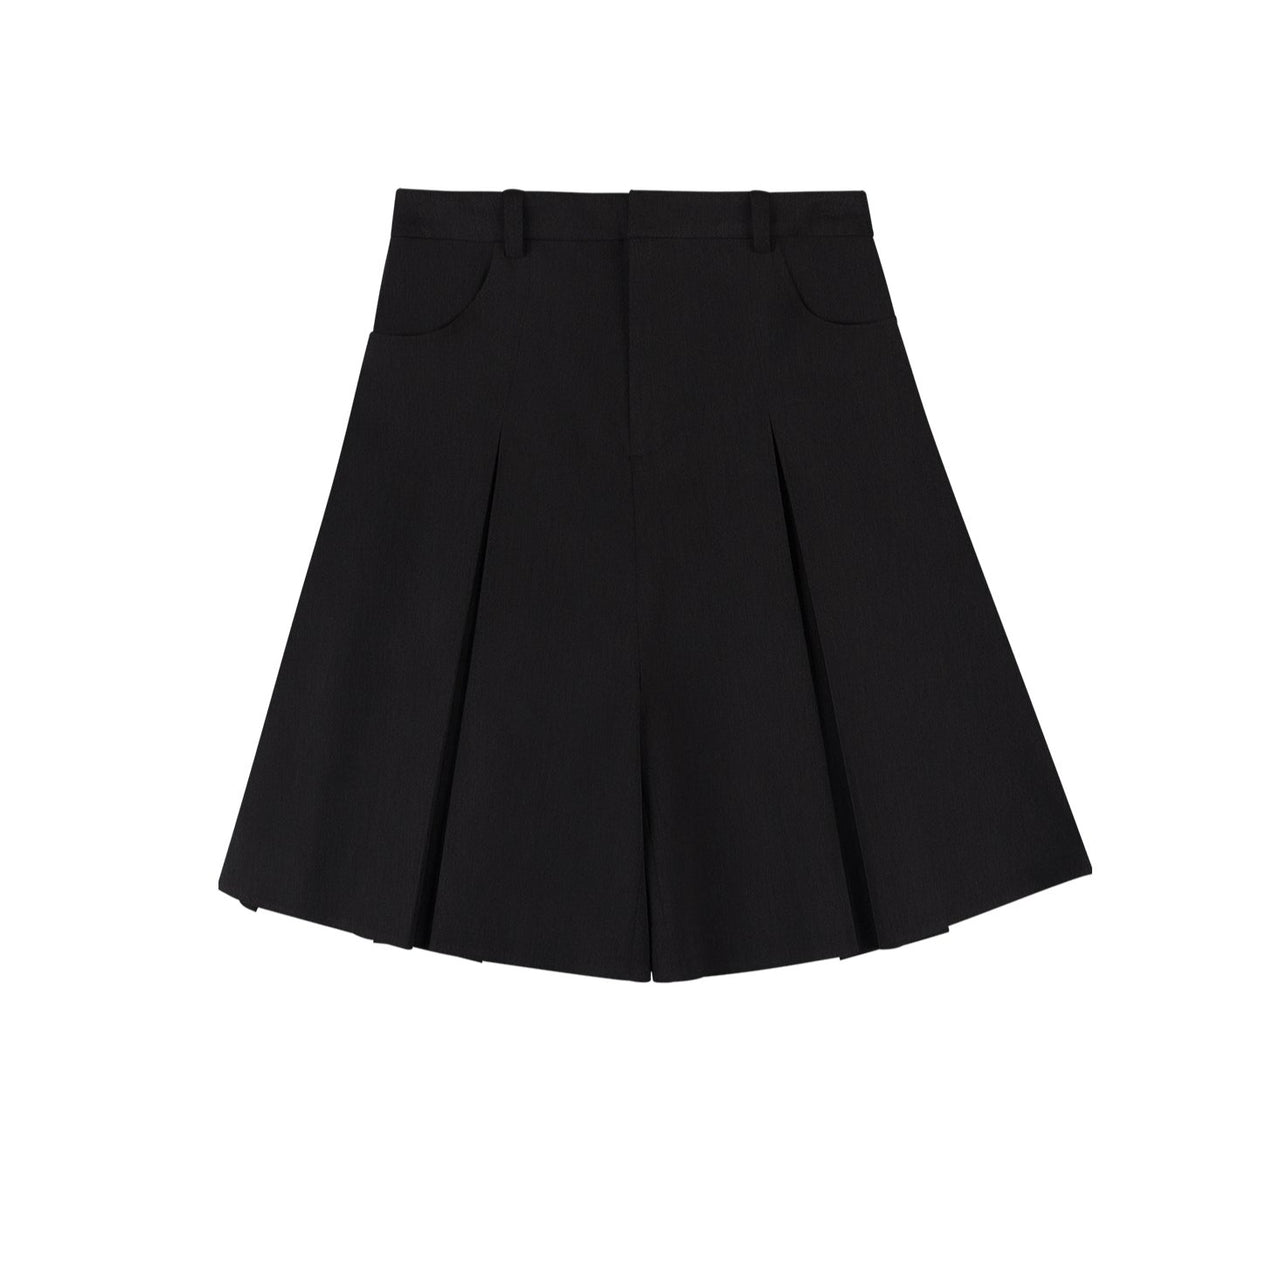 Four-Quarter With Combined Pleats Skirt